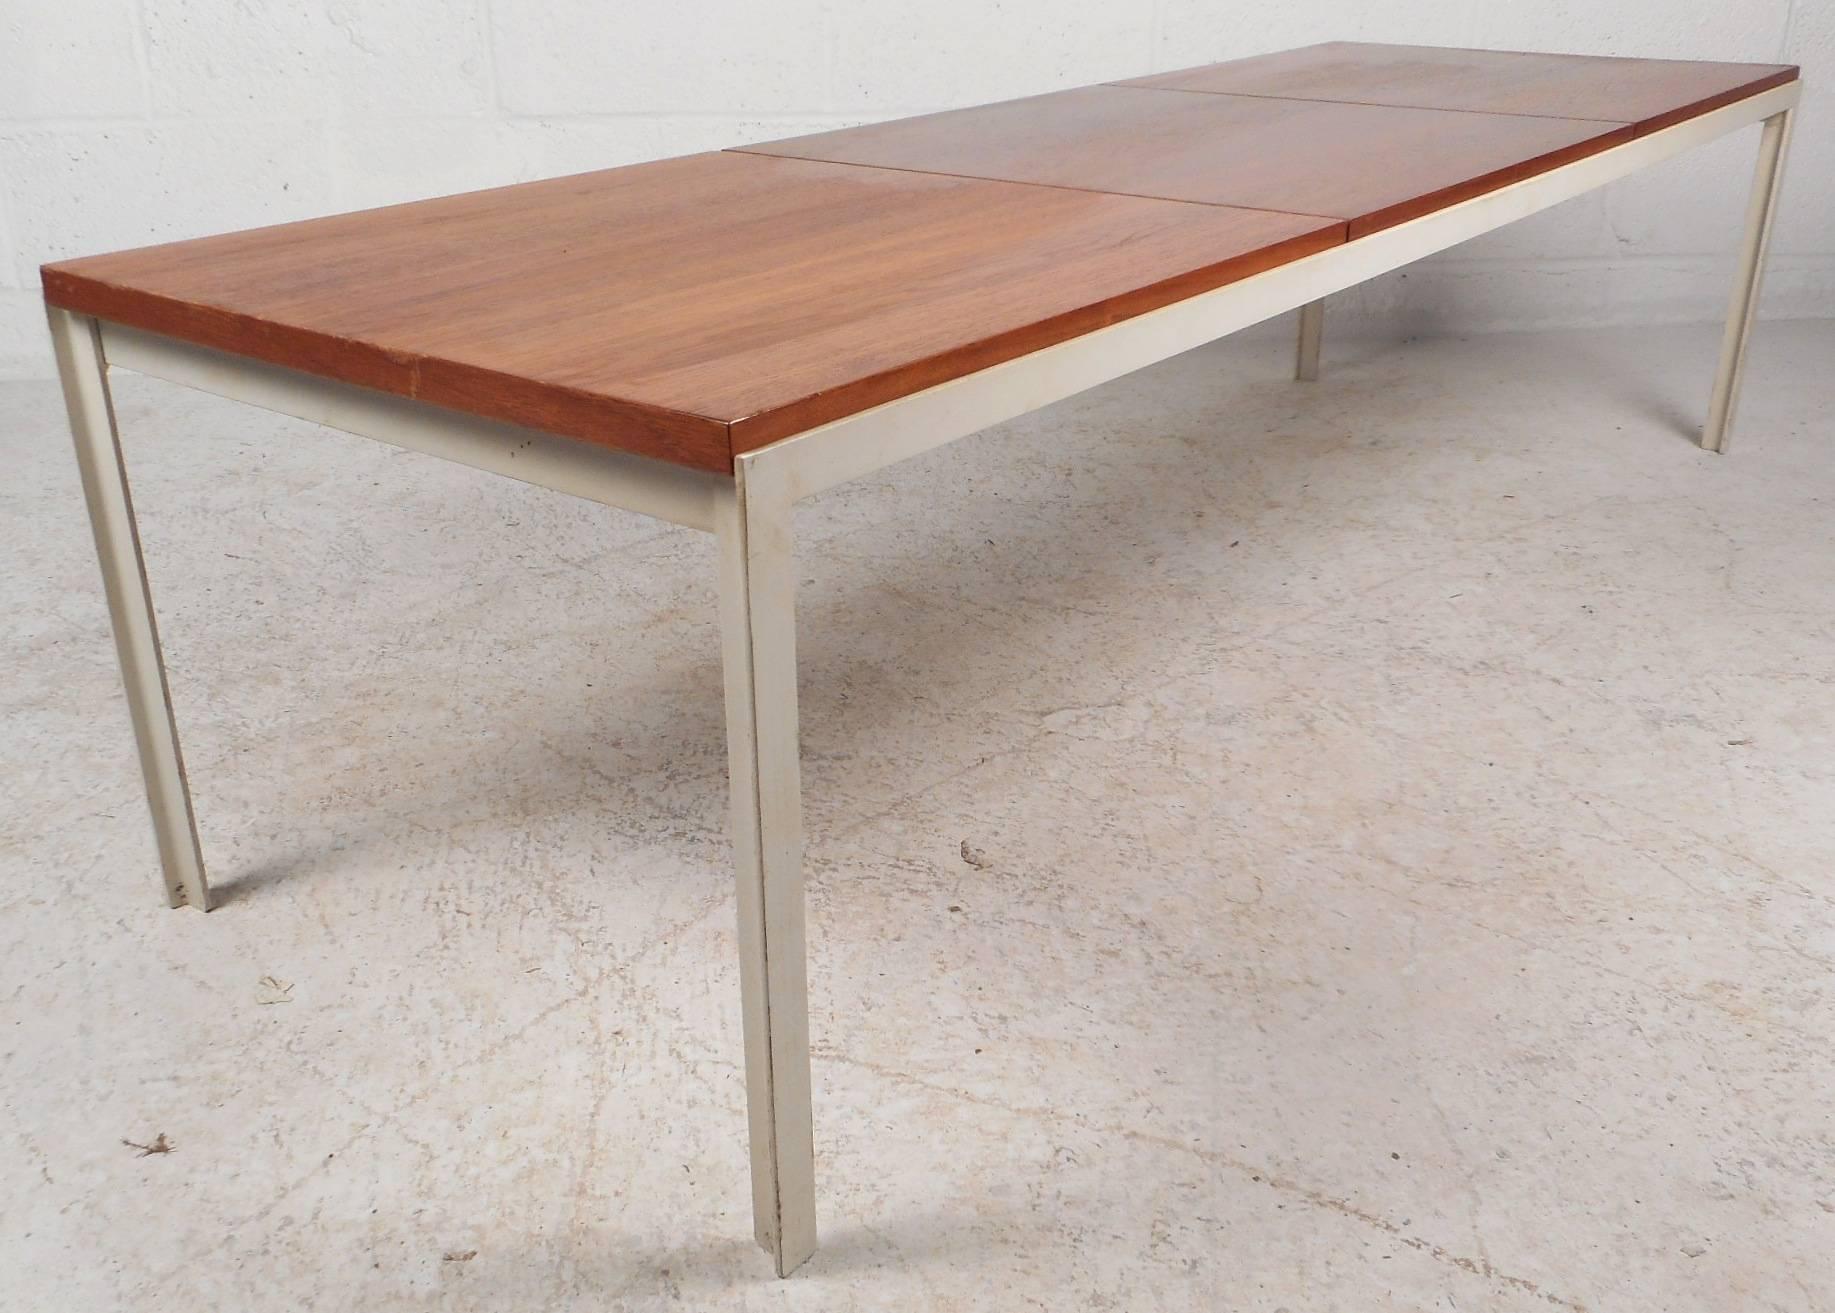 American Exquisite Mid-Century Modern Coffee Table by Florence Knoll